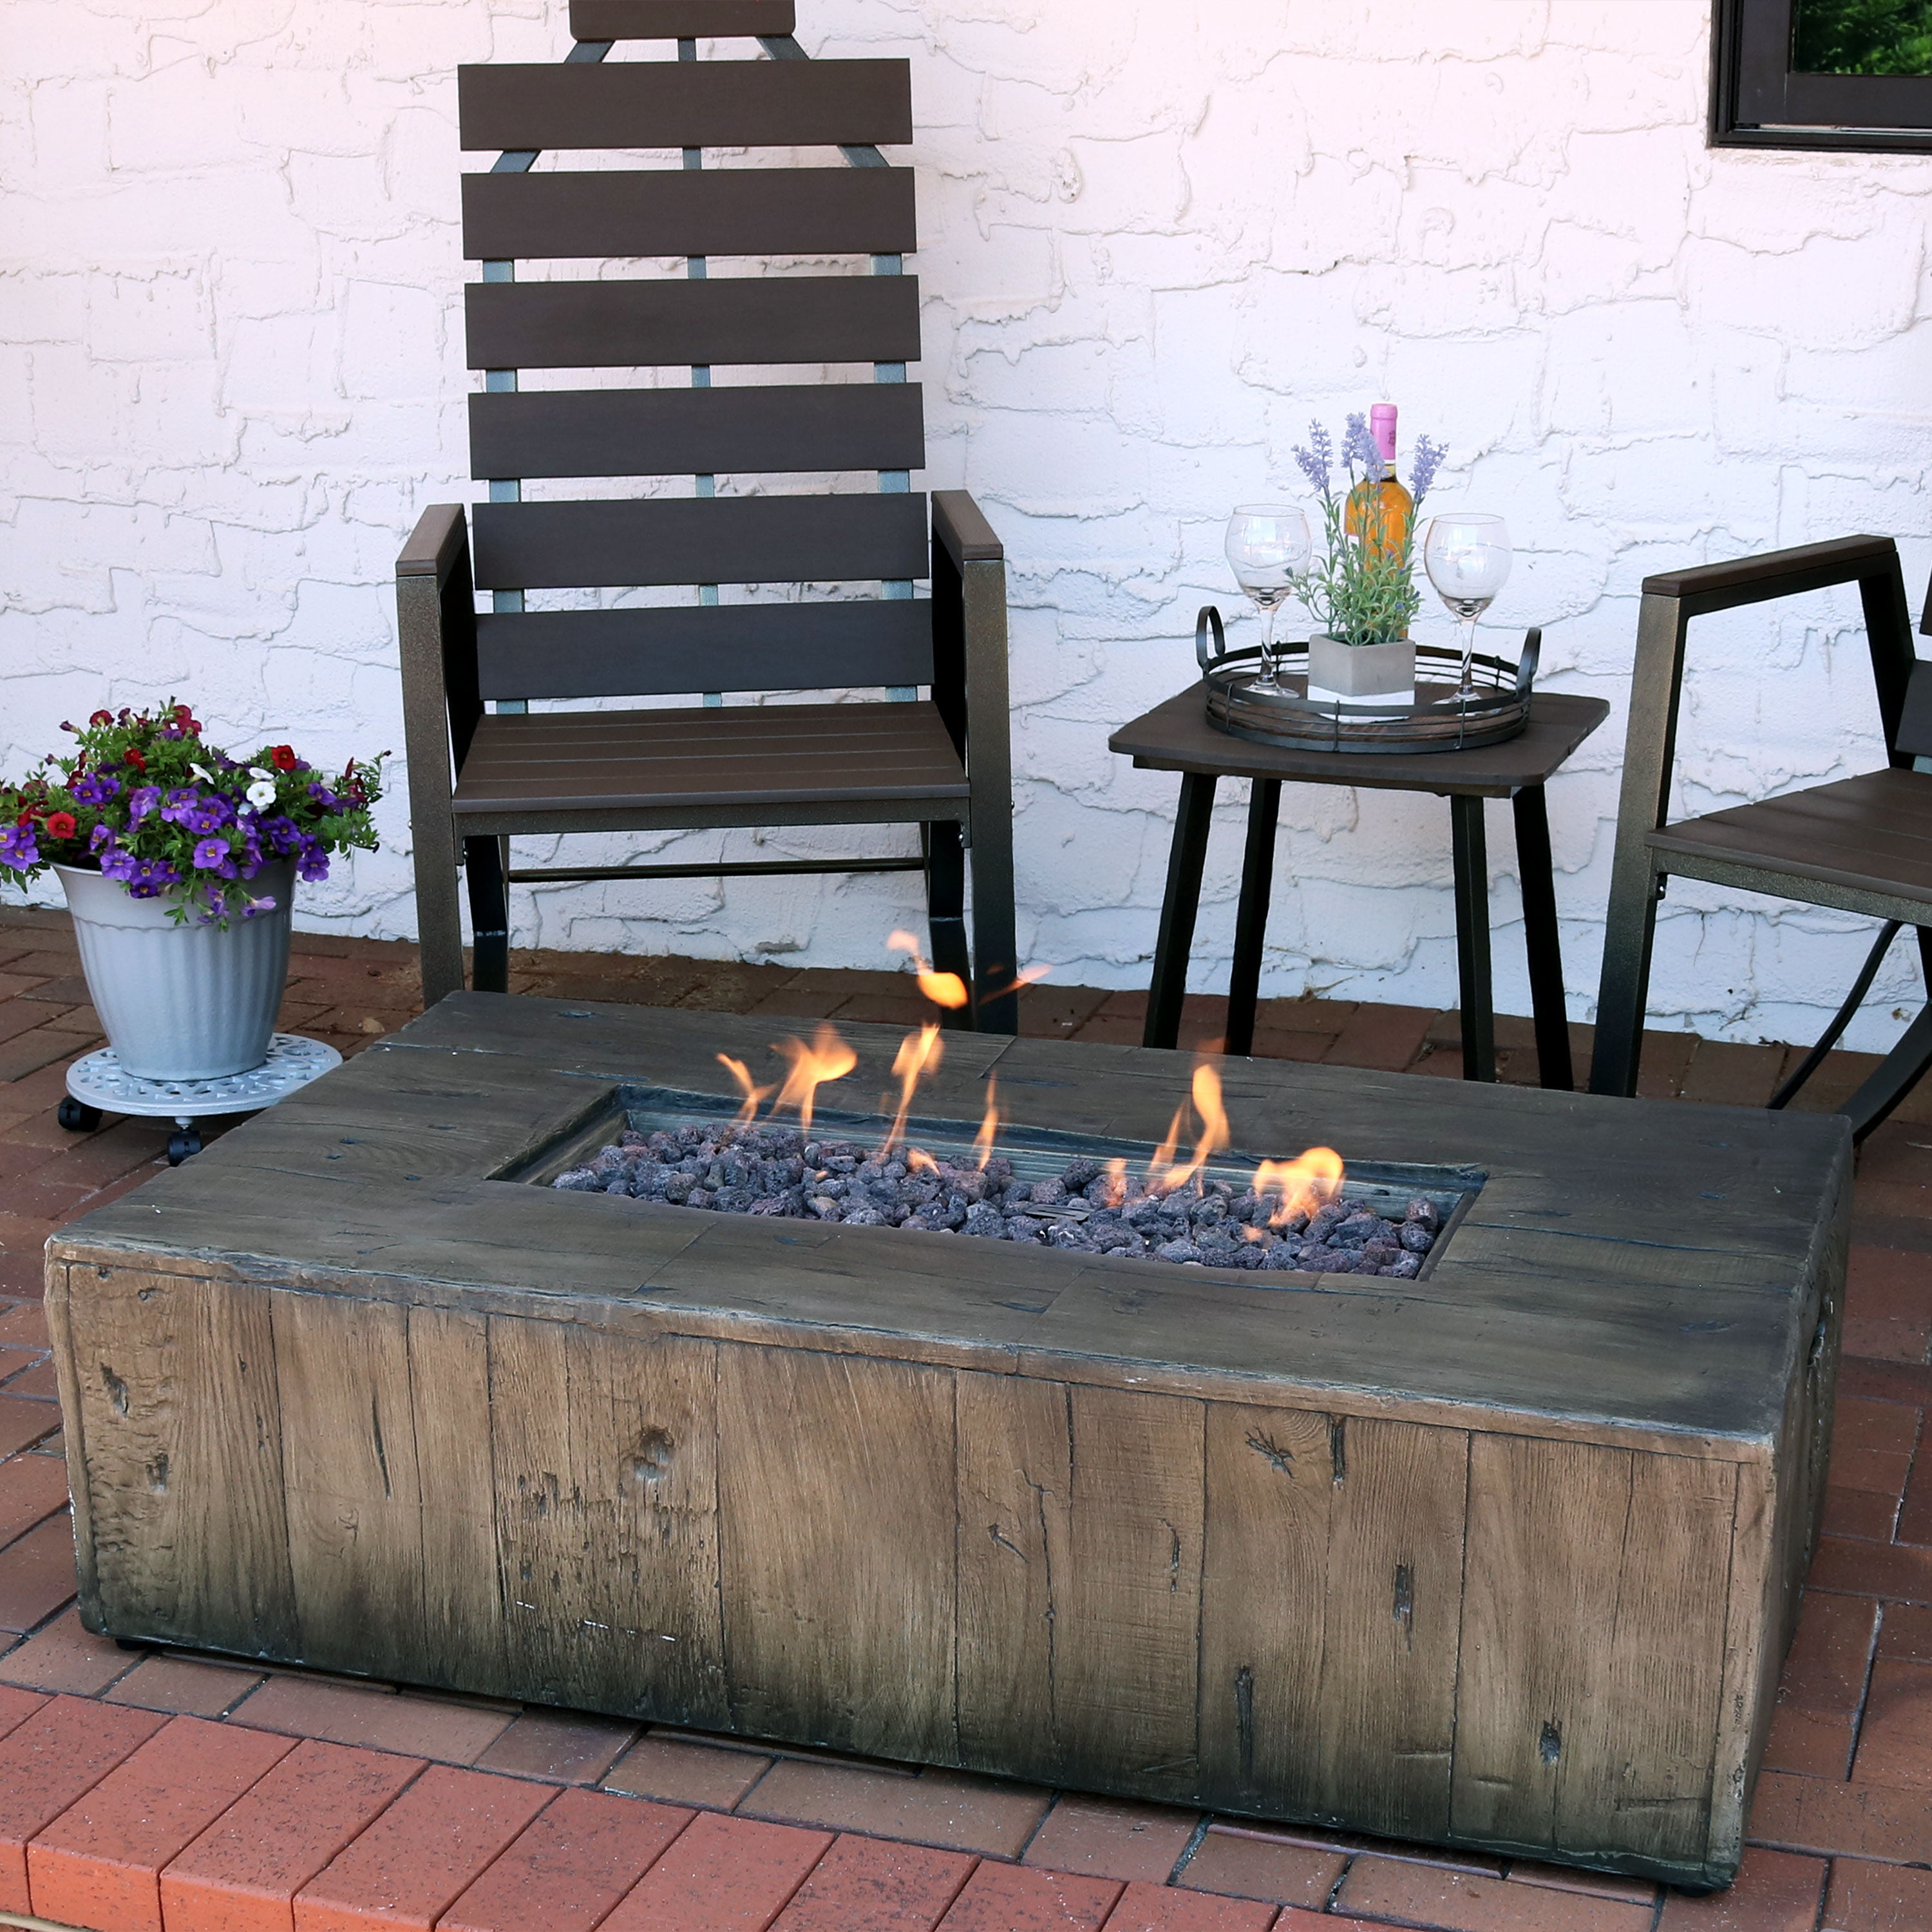 Sunnydaze Rustic Propane Gas Fire Pit, Propane Fire Pit Table On Wood Deck